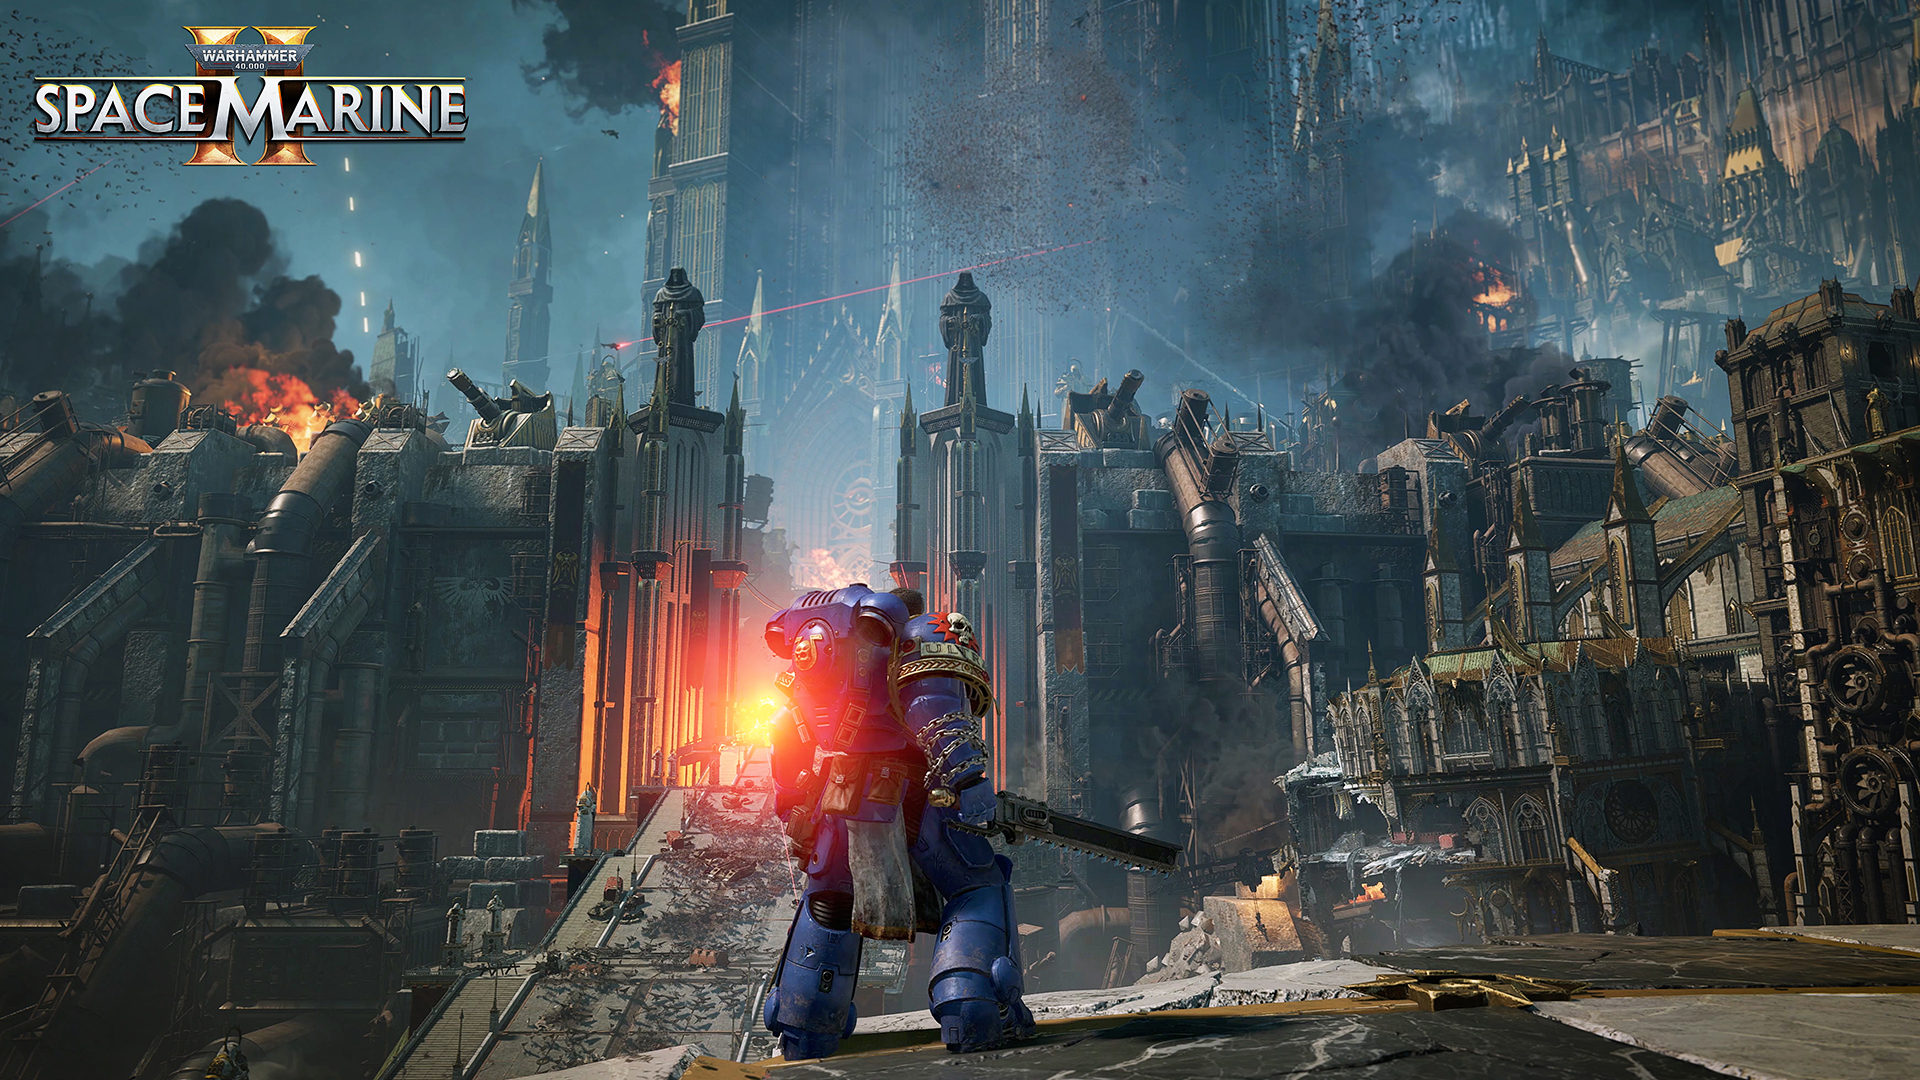 Warhammer 40K: Space Marine 2 HD wallpaper featuring an armored space marine gazing upon a dystopian battlefield.